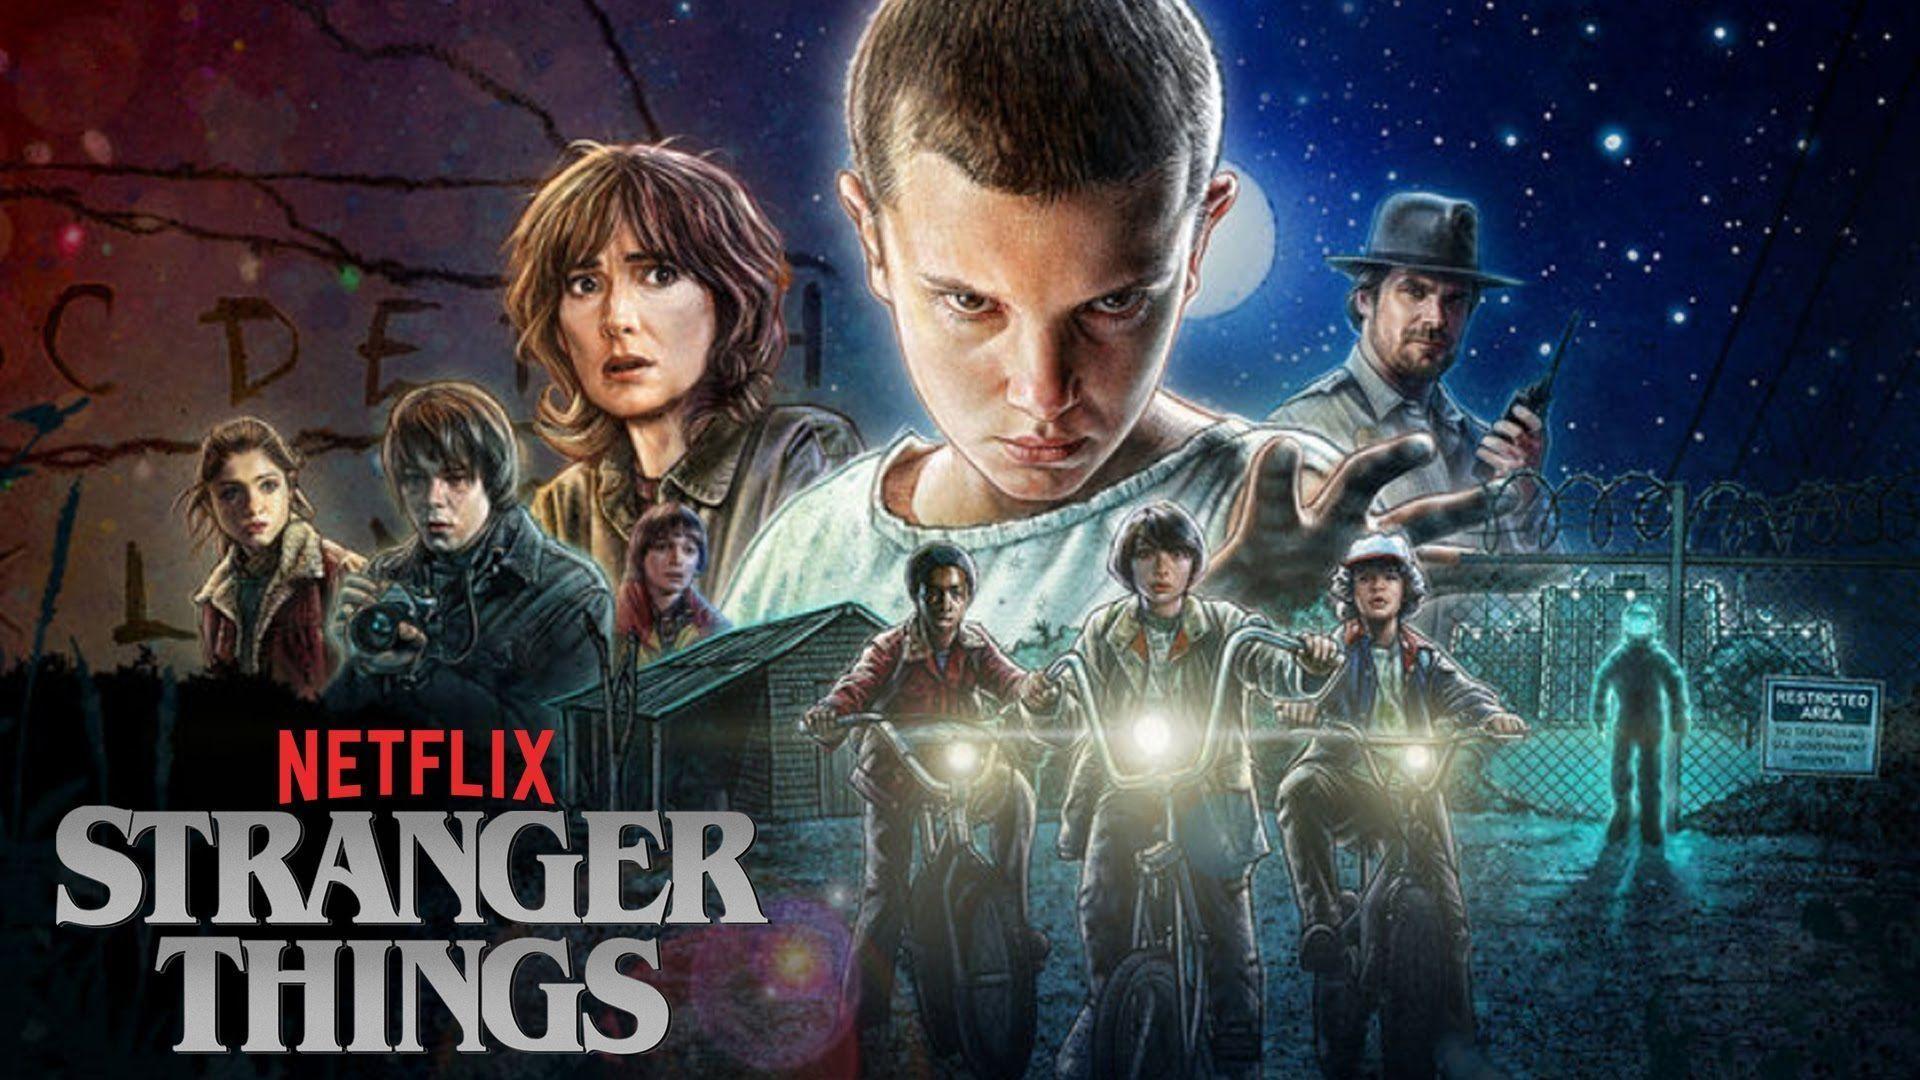 Download this awesome wallpaper. Stranger Things